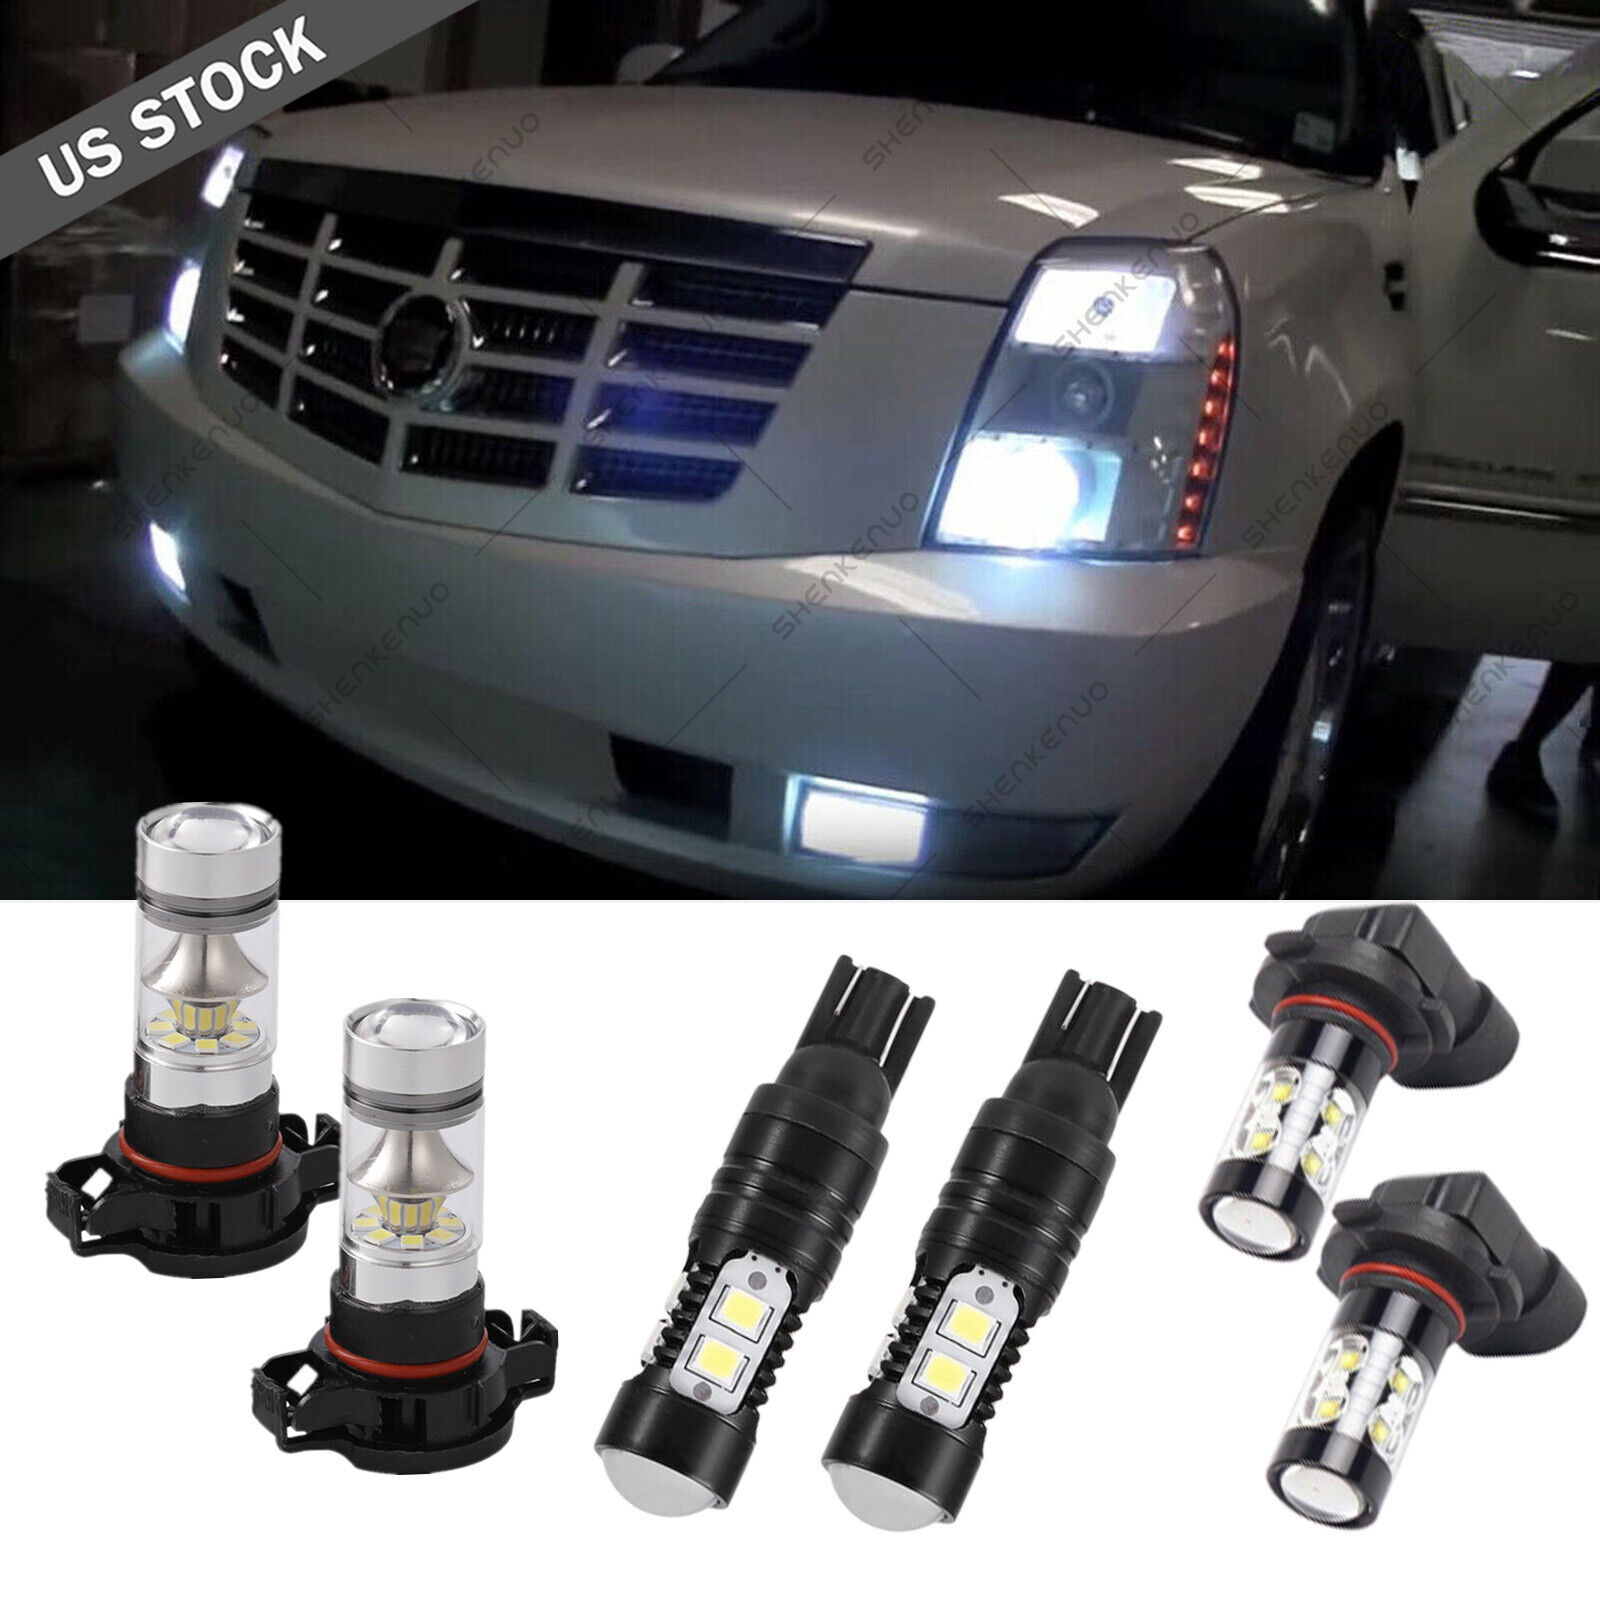 6x White LED For 2007-14 Cadillac Escalade Fog Driving DRL Light Bulbs Combo Kit